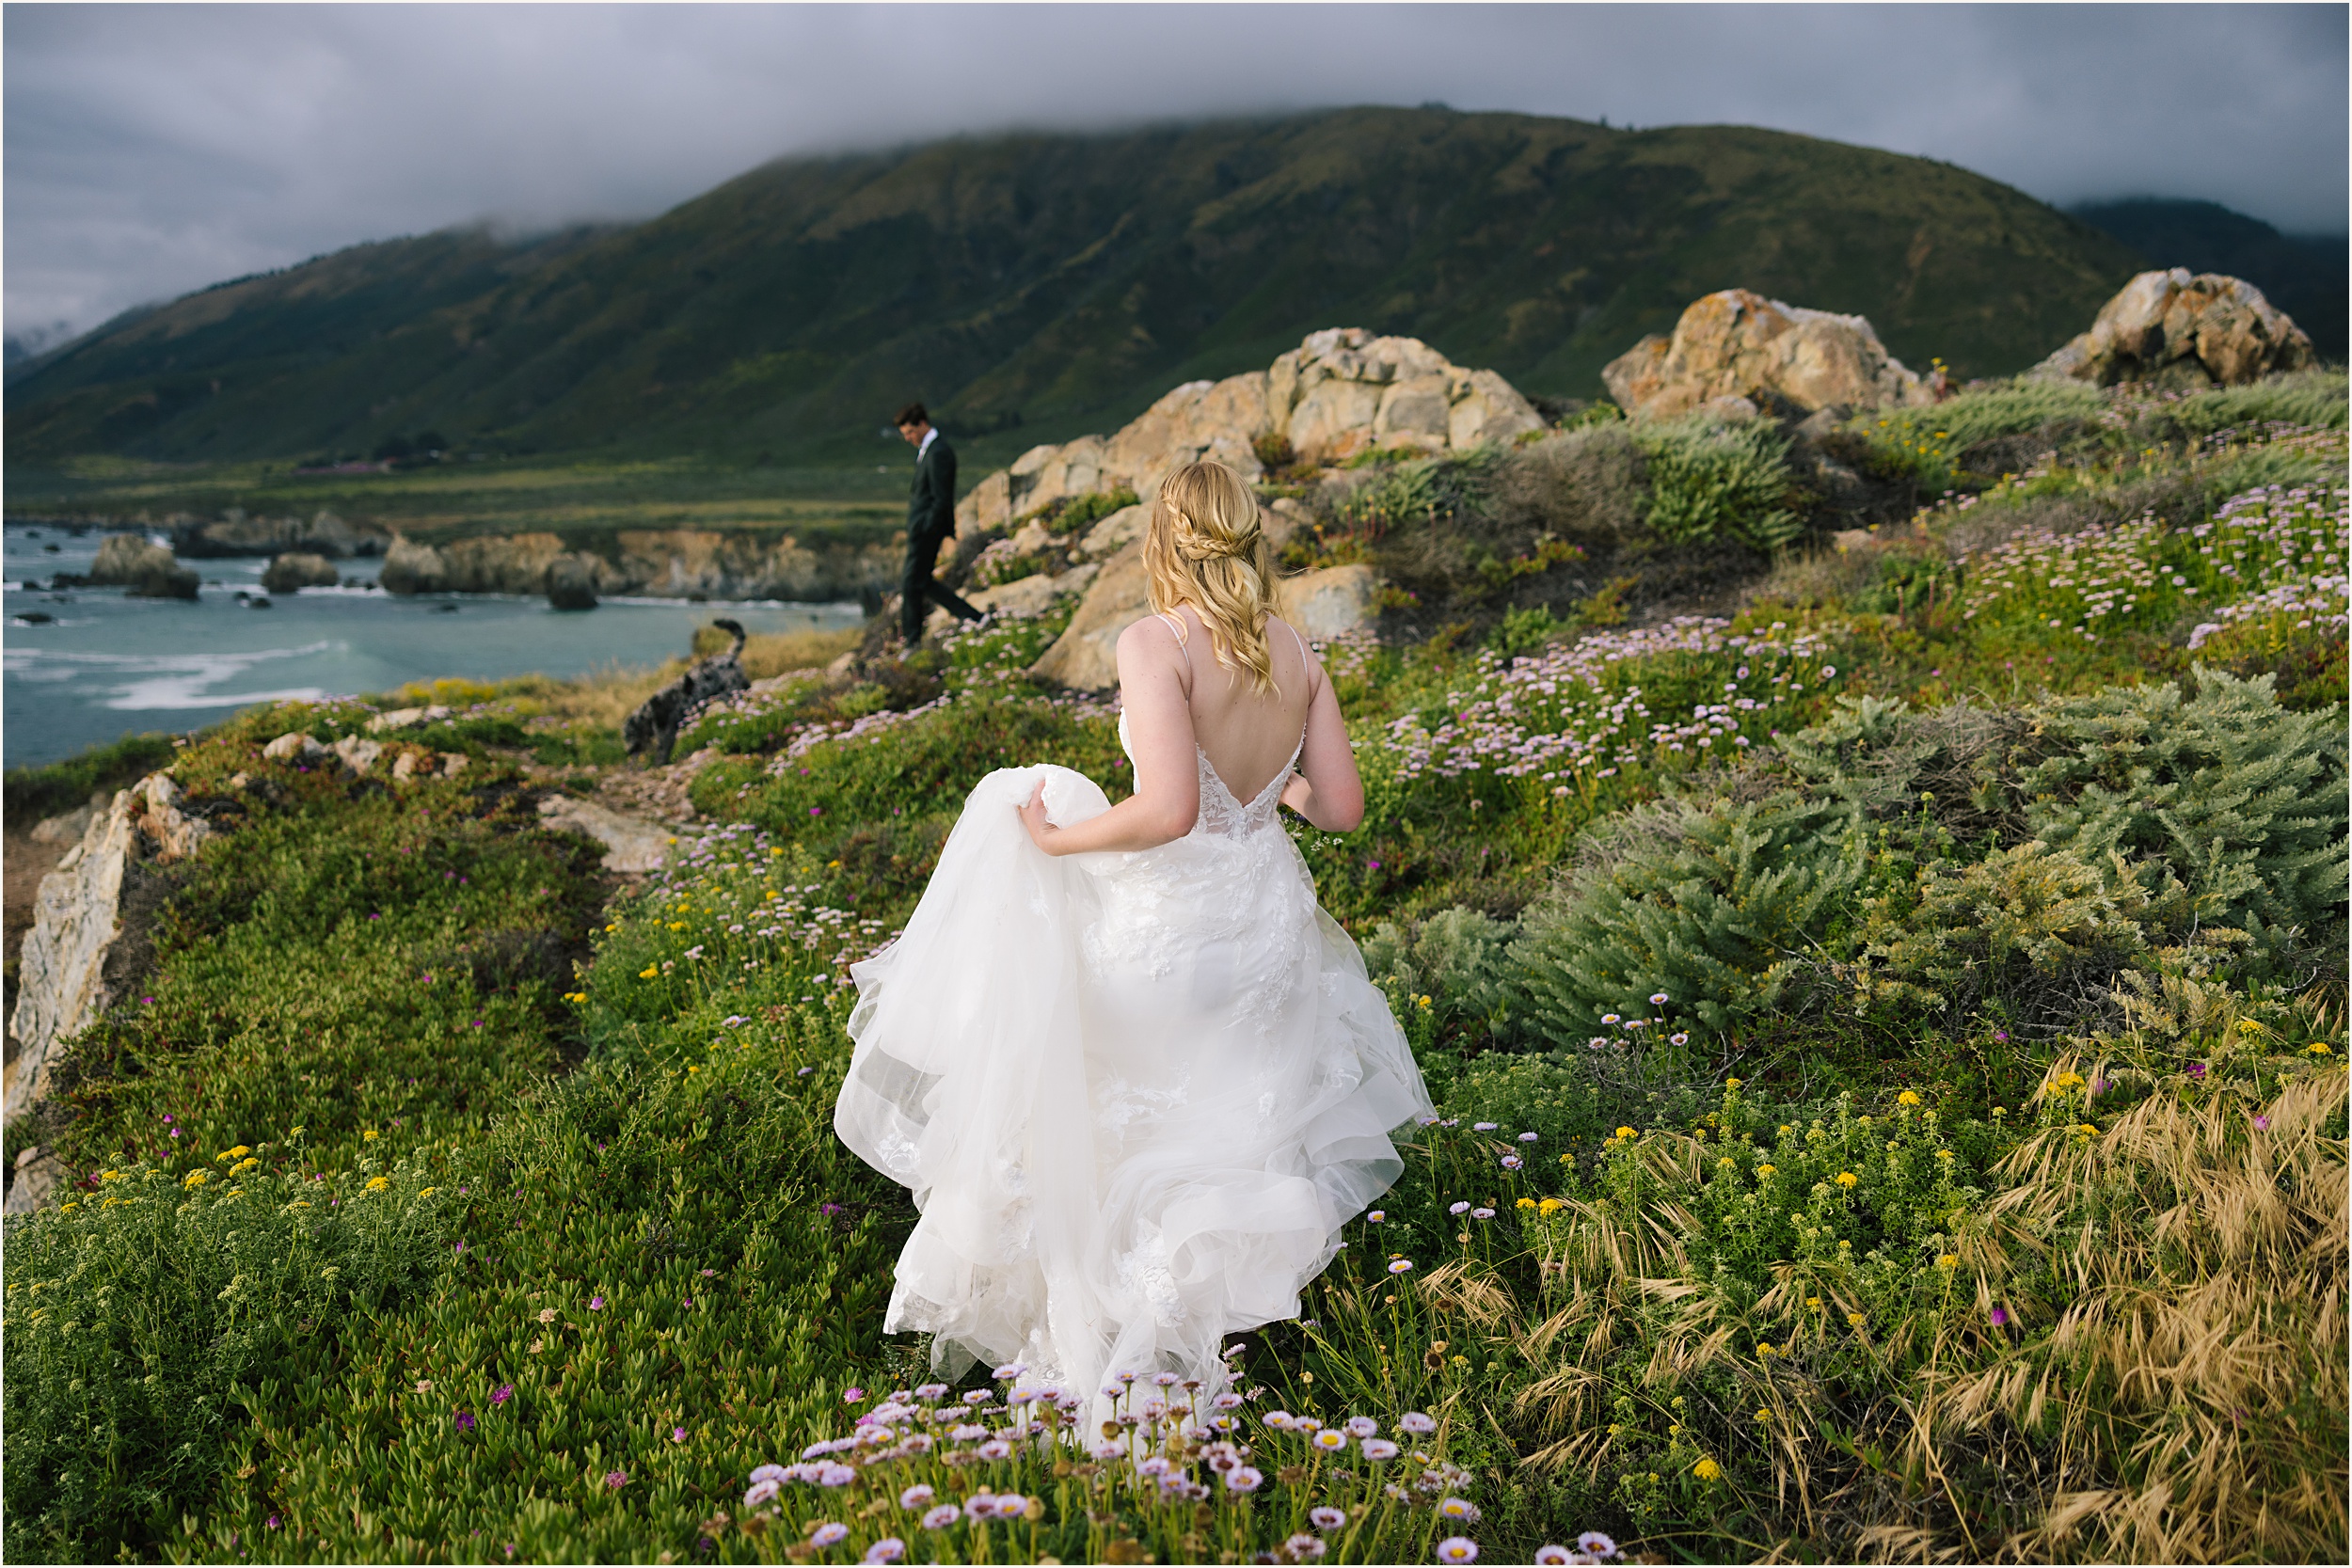 Emma-and-Chase-110-1 Cliffside Elopement in Big Sur // Emma & Chase